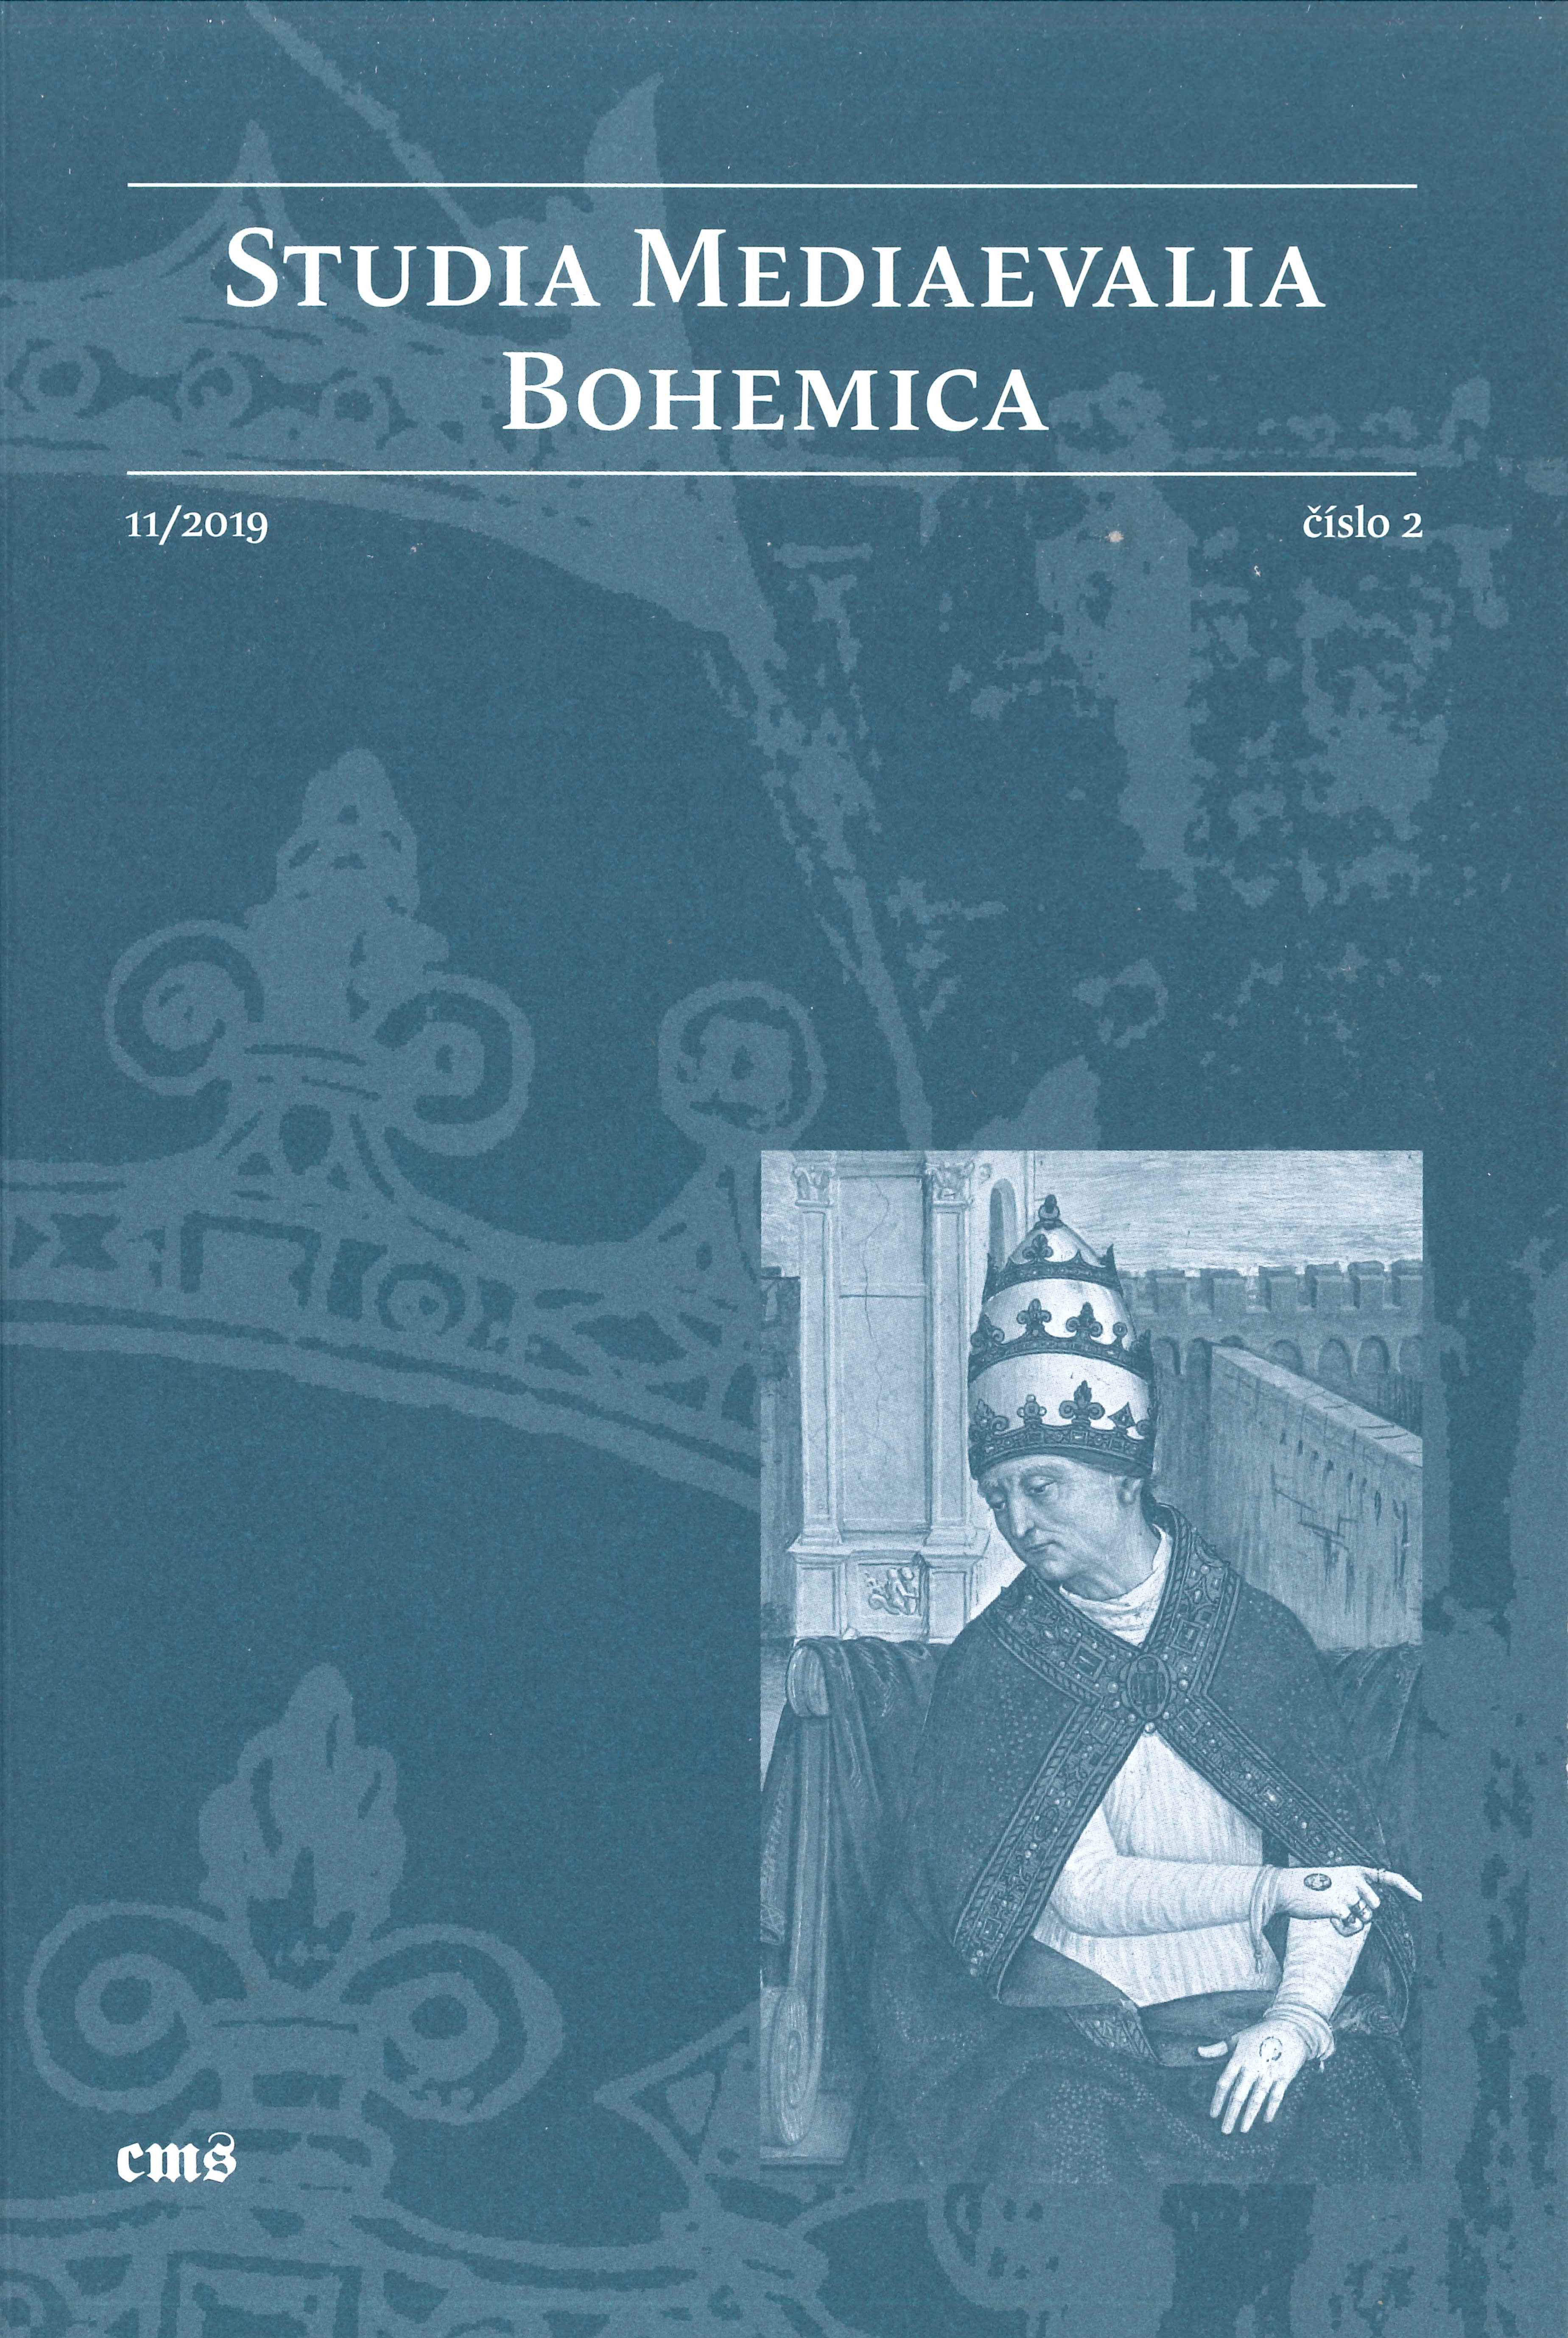 Éloïse Adde-Vomáčka, The Chronicle of Dalimil ’. The beginnings of Czech national historiography in the vulgar language in the 14th century Cover Image